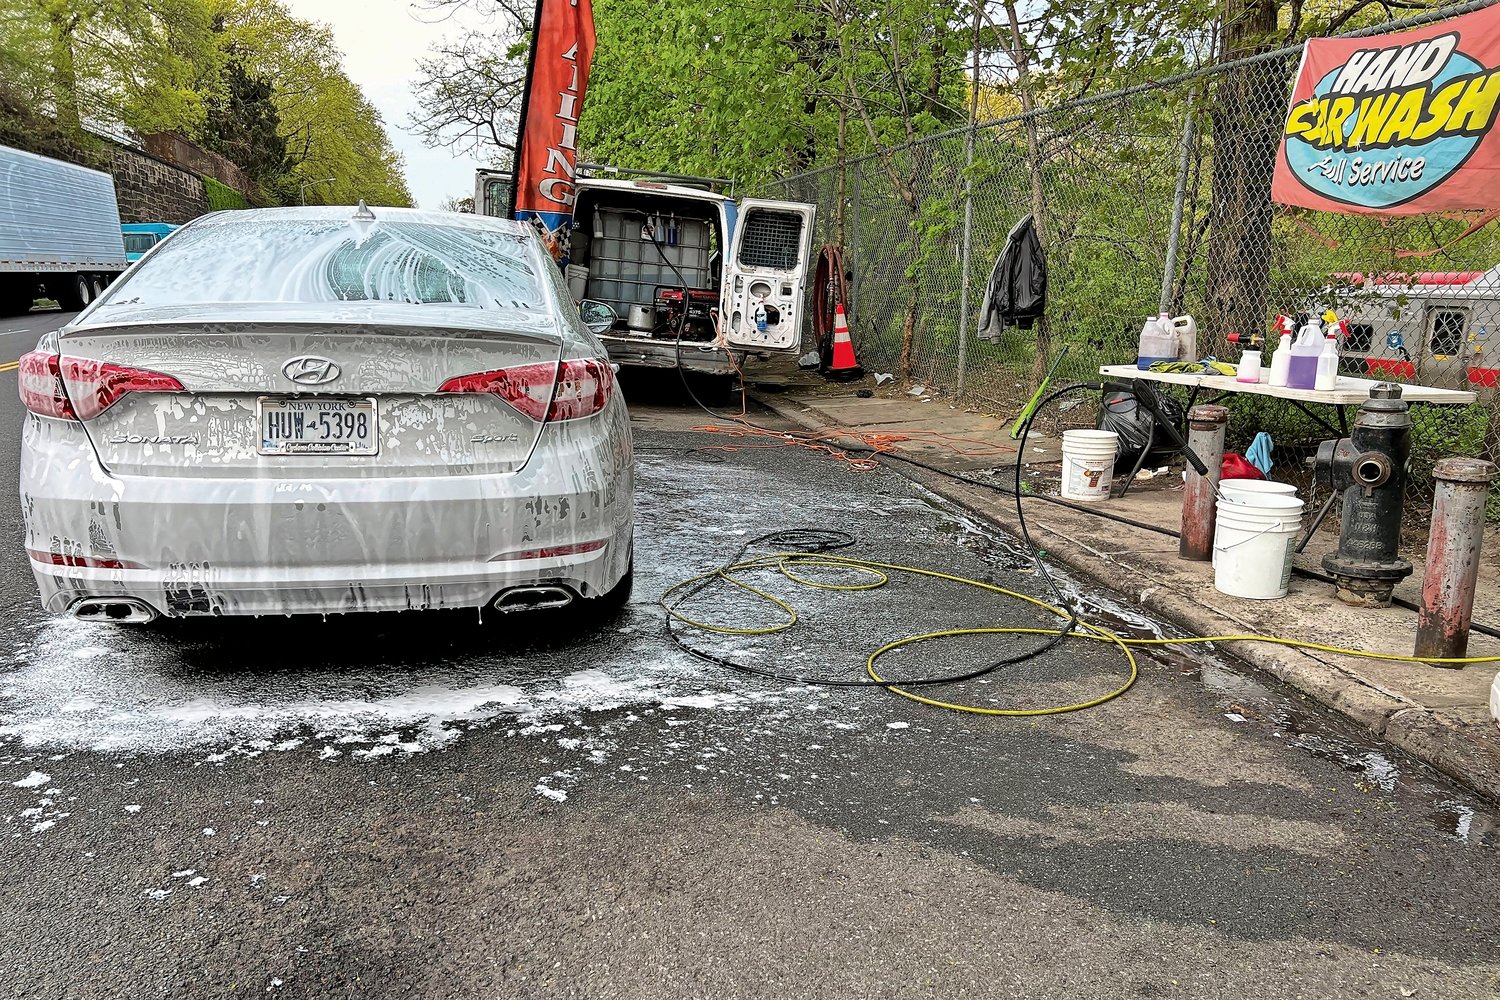 Residents have message: 'Stop working at all these car washes', The  Riverdale Press